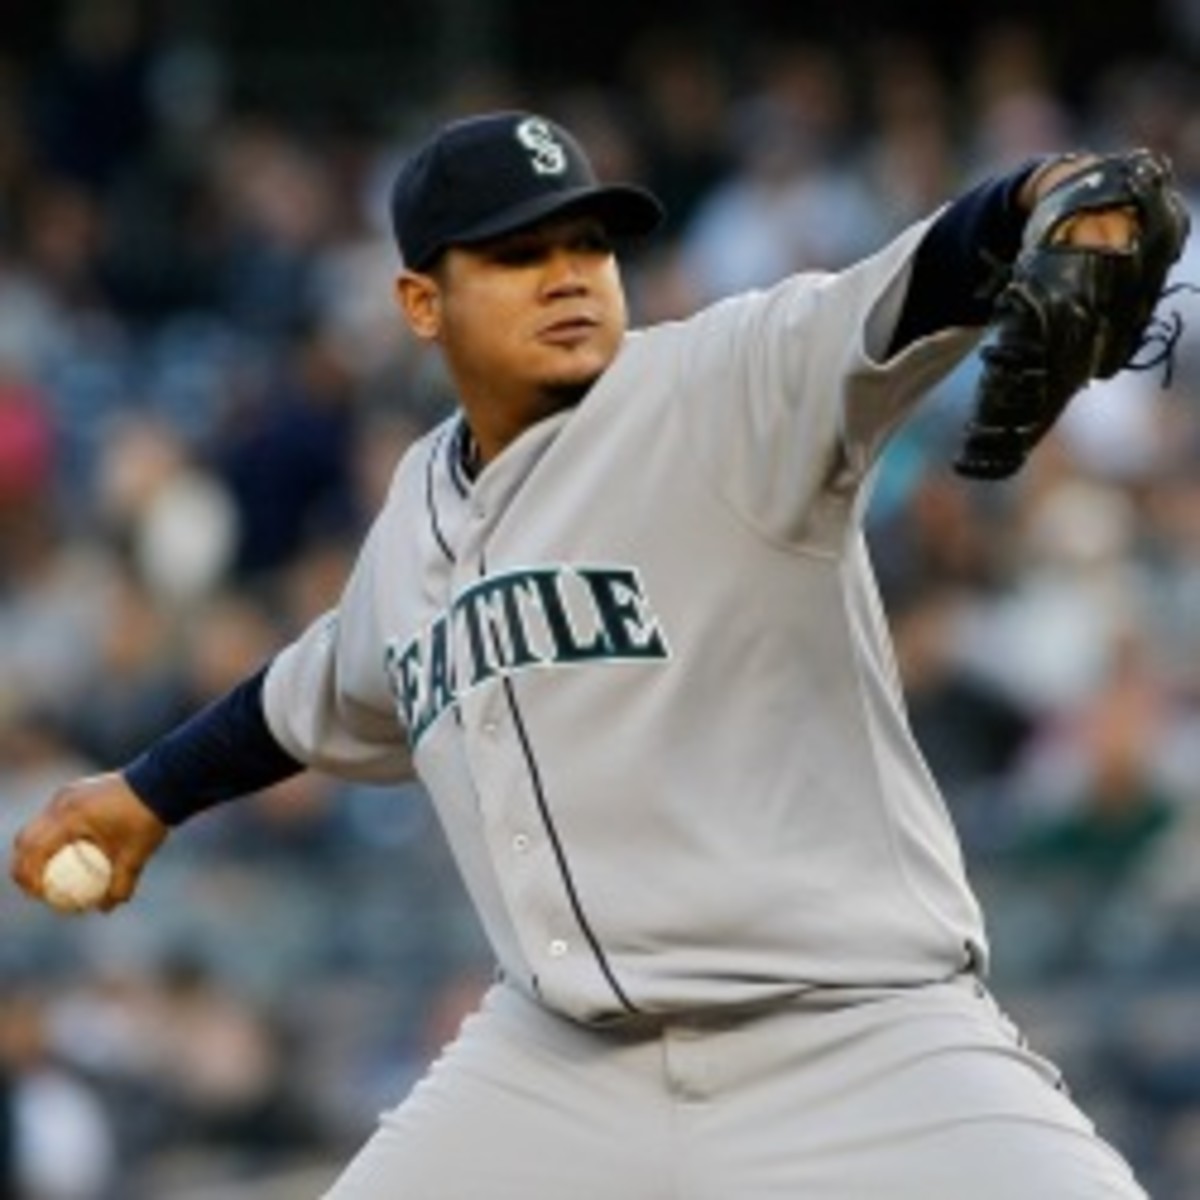 Mariners pitcher Felix Hernandez has two years and $39.5 million left on his contract. (Mike Stobe/Getty Images)